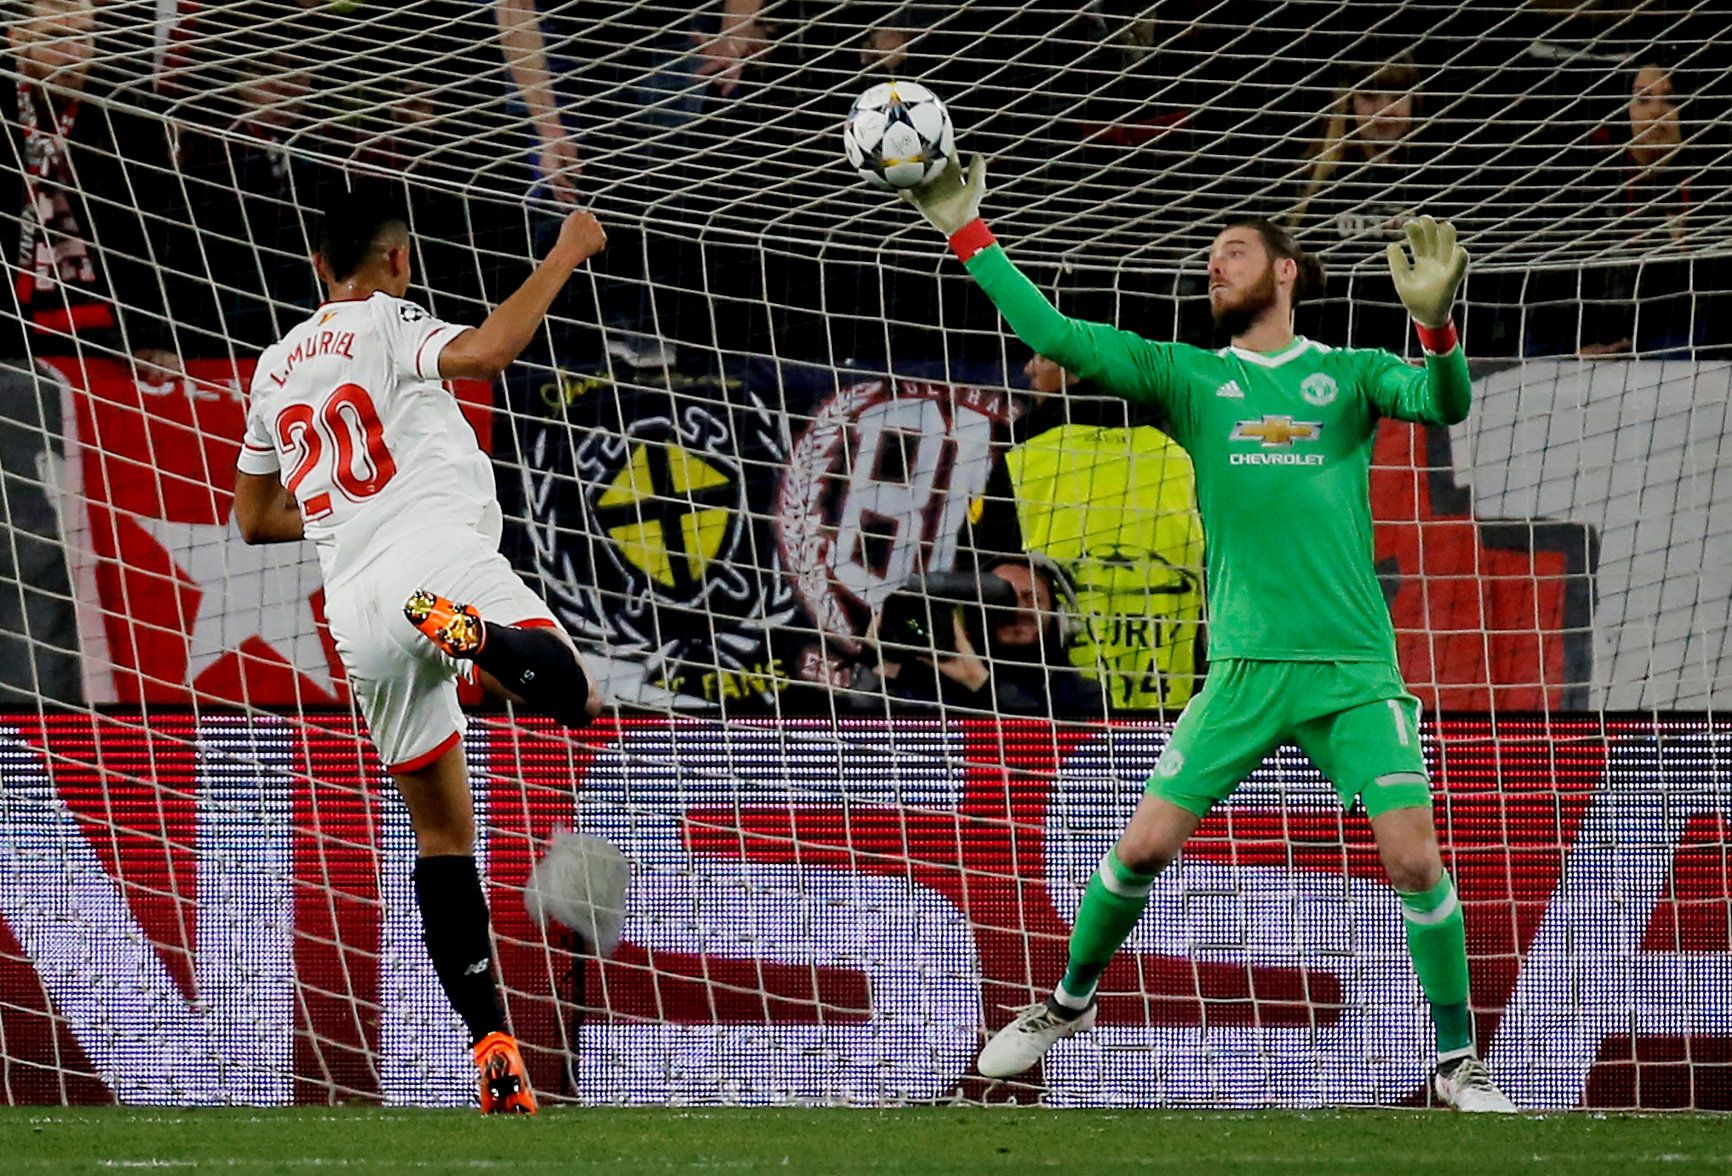 Soccer Football - Champions League Round of 16 First Leg - Sevilla vs Manchester United - Ramon Sanchez Pizjuan, Seville, Spain - February 21, 2018   Manchester United's David De Gea makes a save from Sevilla’s Luis Muriel    REUTERS/Jon Nazca     TPX IMAGES OF THE DAY